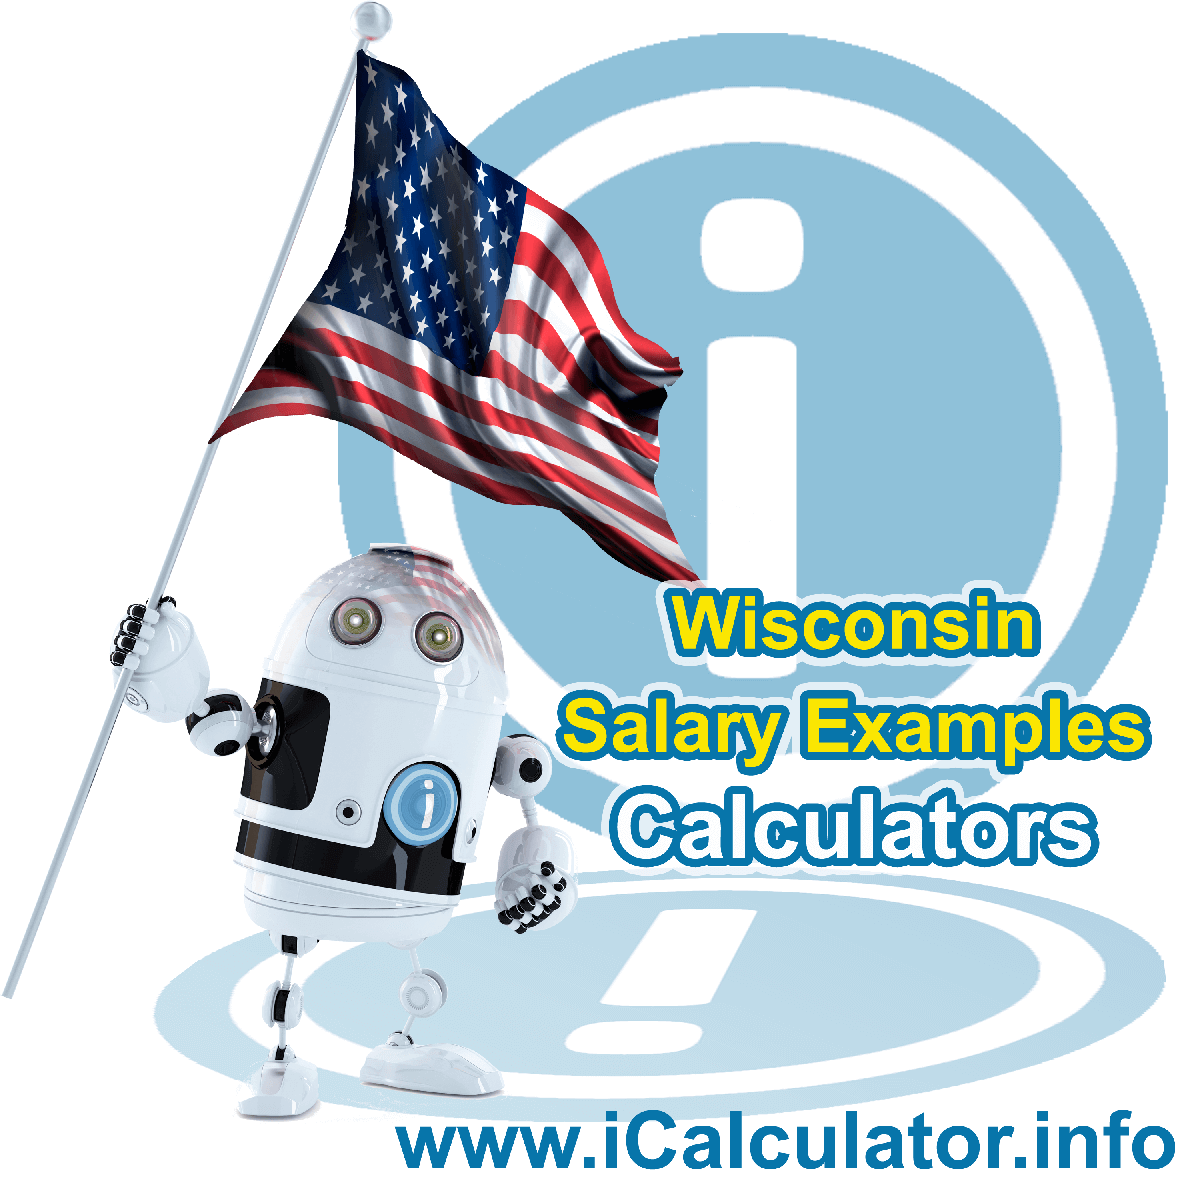 Wisconsin Salary Example for $ 130,000.00 in 2023 | iCalculator™ | $ 130,000.00 salary example for employee and employer paying Wisconsin State tincome taxes. Detailed salary after tax calculation including Wisconsin State Tax, Federal State Tax, Medicare Deductions, Social Security, Capital Gains and other income tax and salary deductions complete with supporting Wisconsin state tax tables 